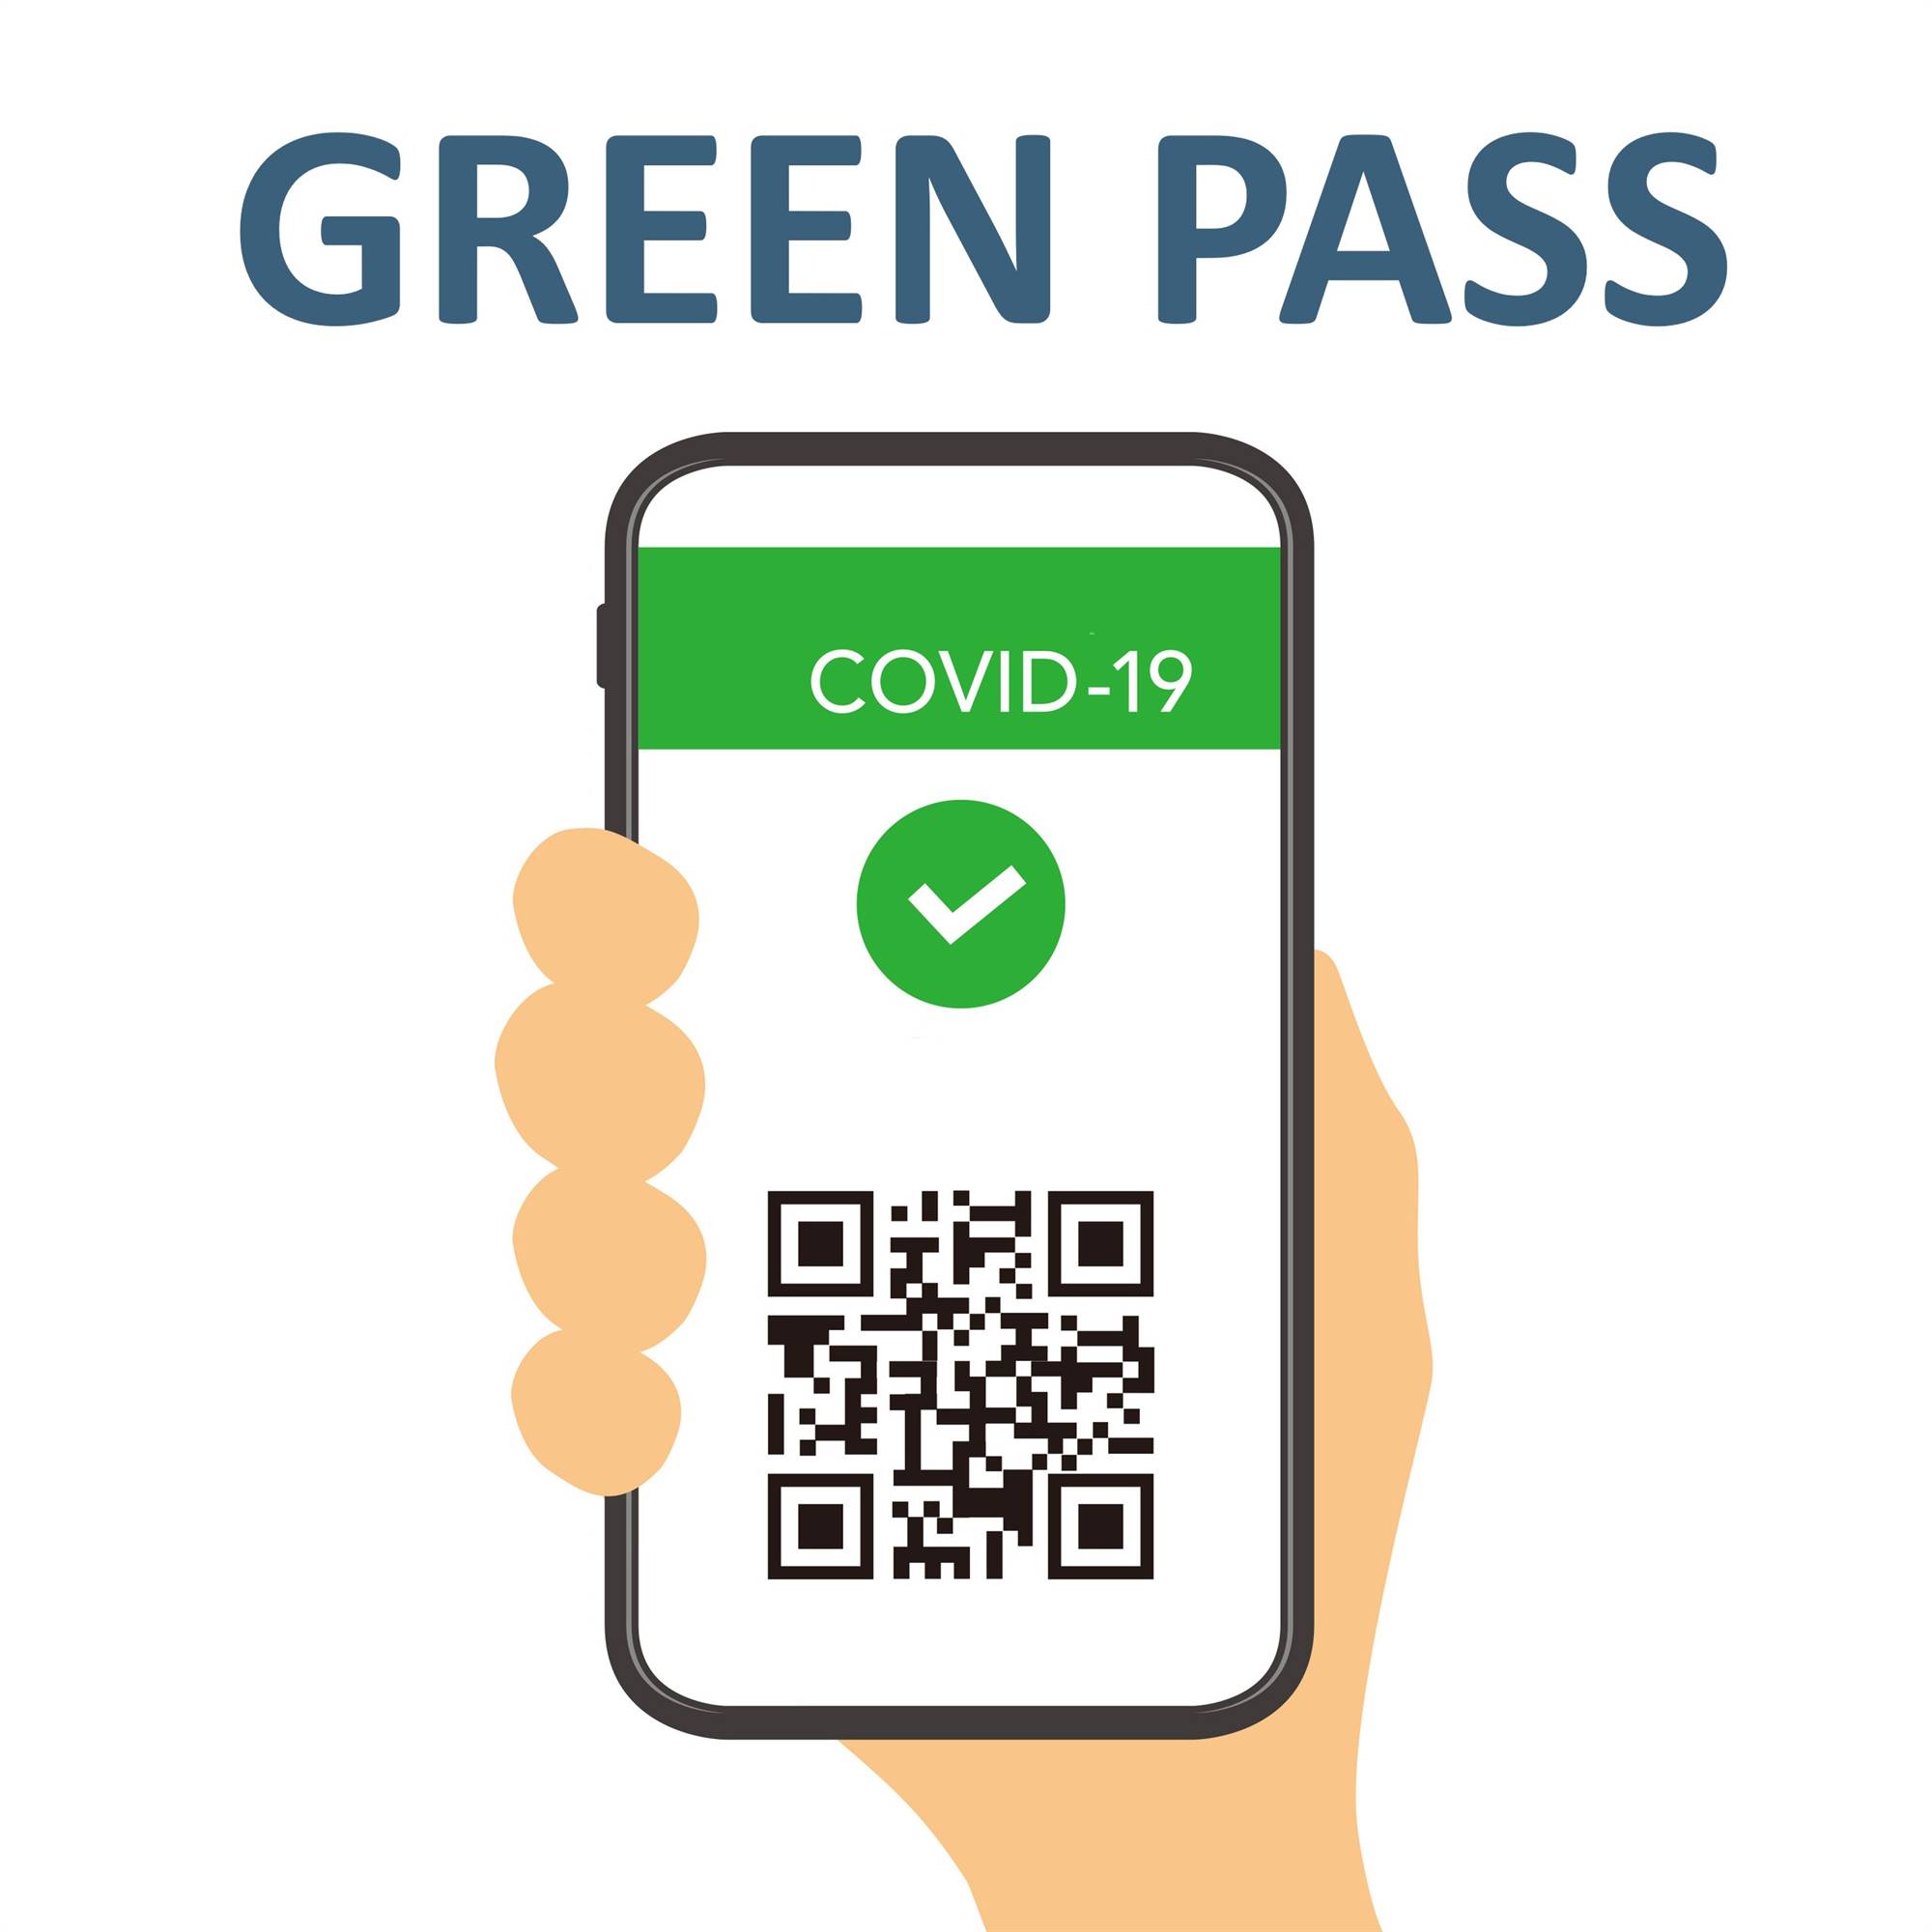 How the Green Pass works in Italy